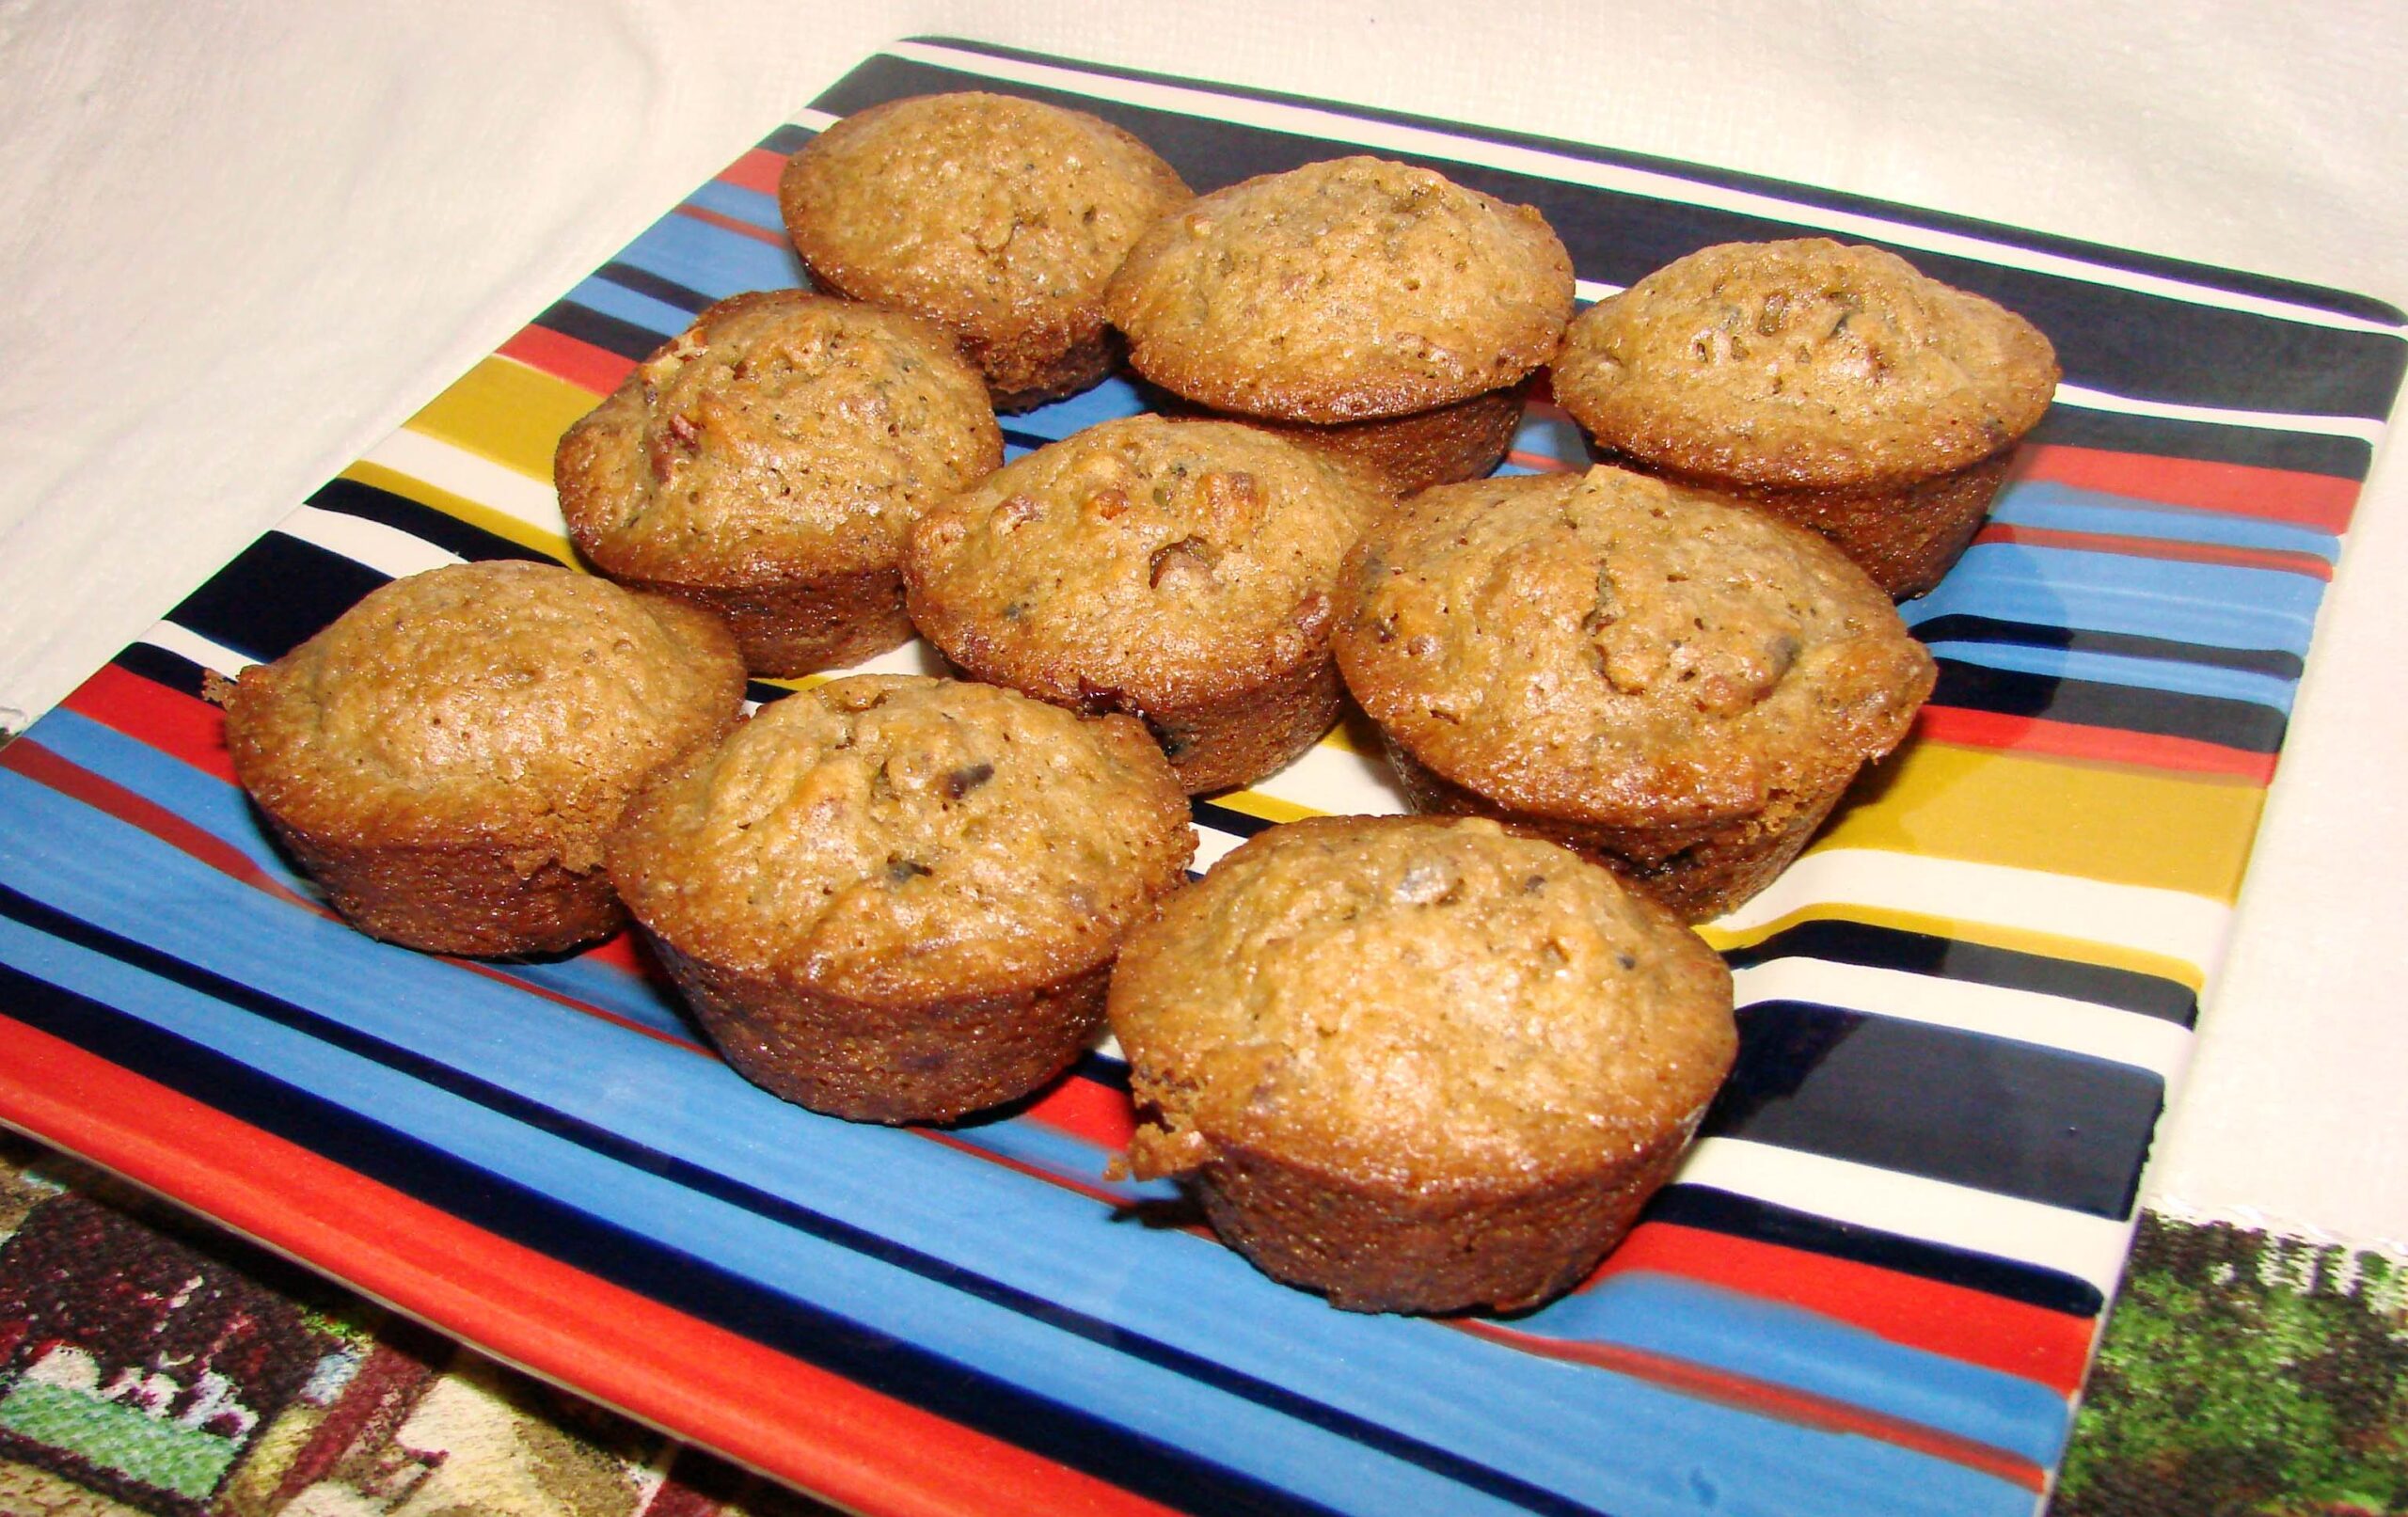  These muffins are more than just breakfast – they're a flavorful experience.